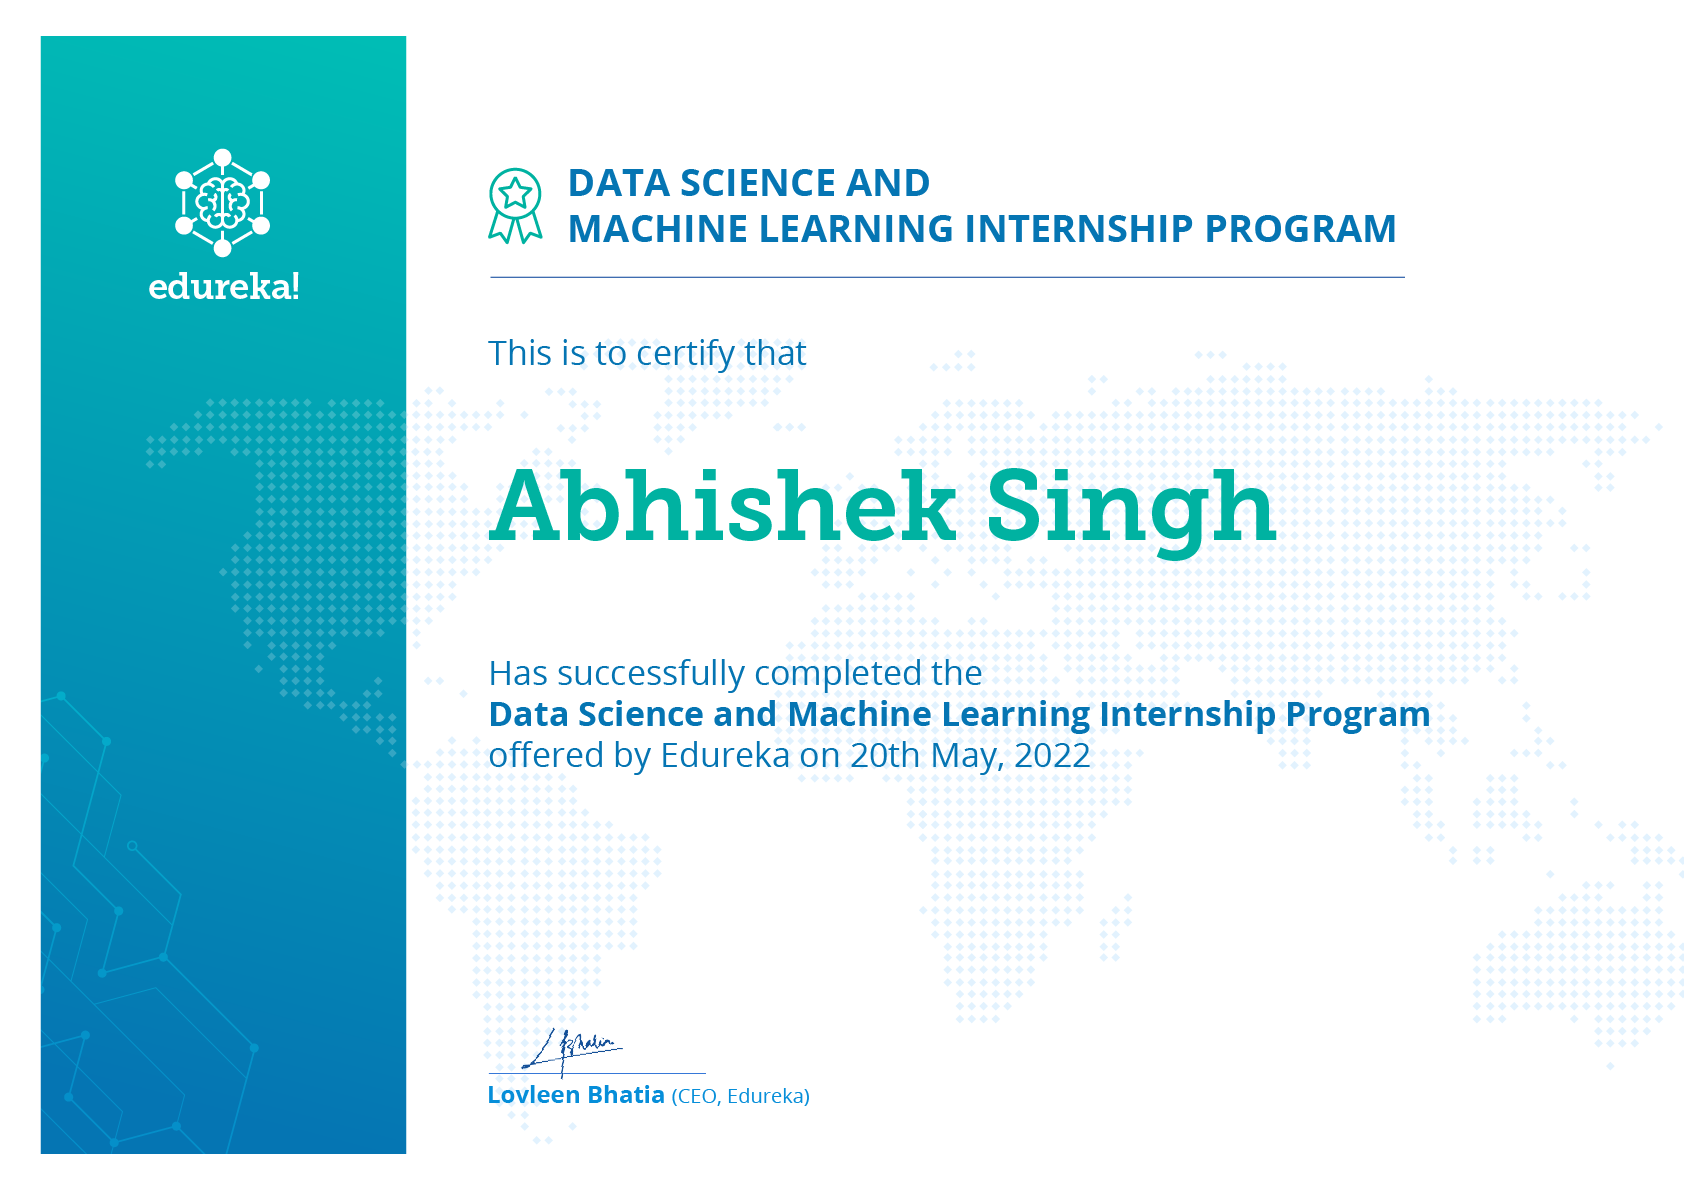 Data Science and Machine Learning Internship Certificate